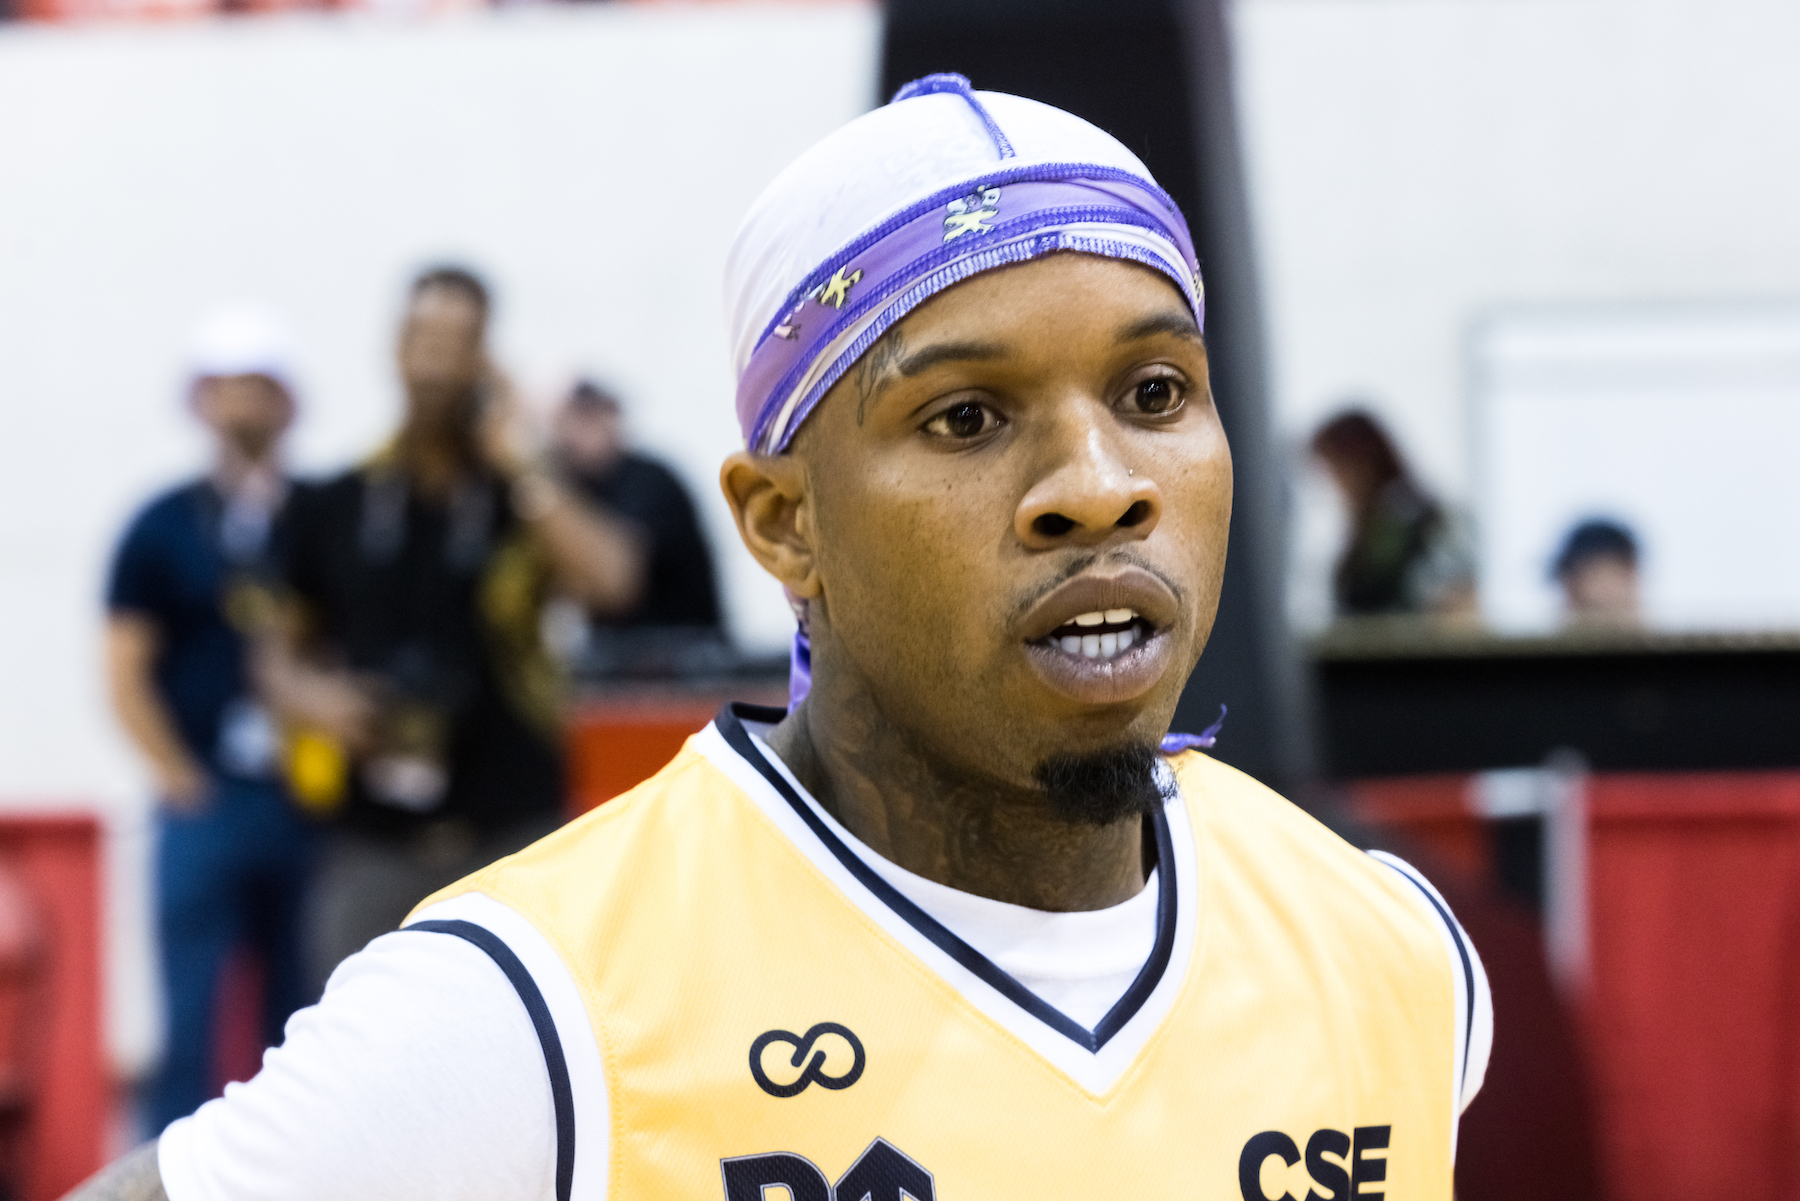 Tory Lanez, who is represented by Snoop Dogg and Casey Anthony's former lawyers, wearing a yellow jersey and purple durag